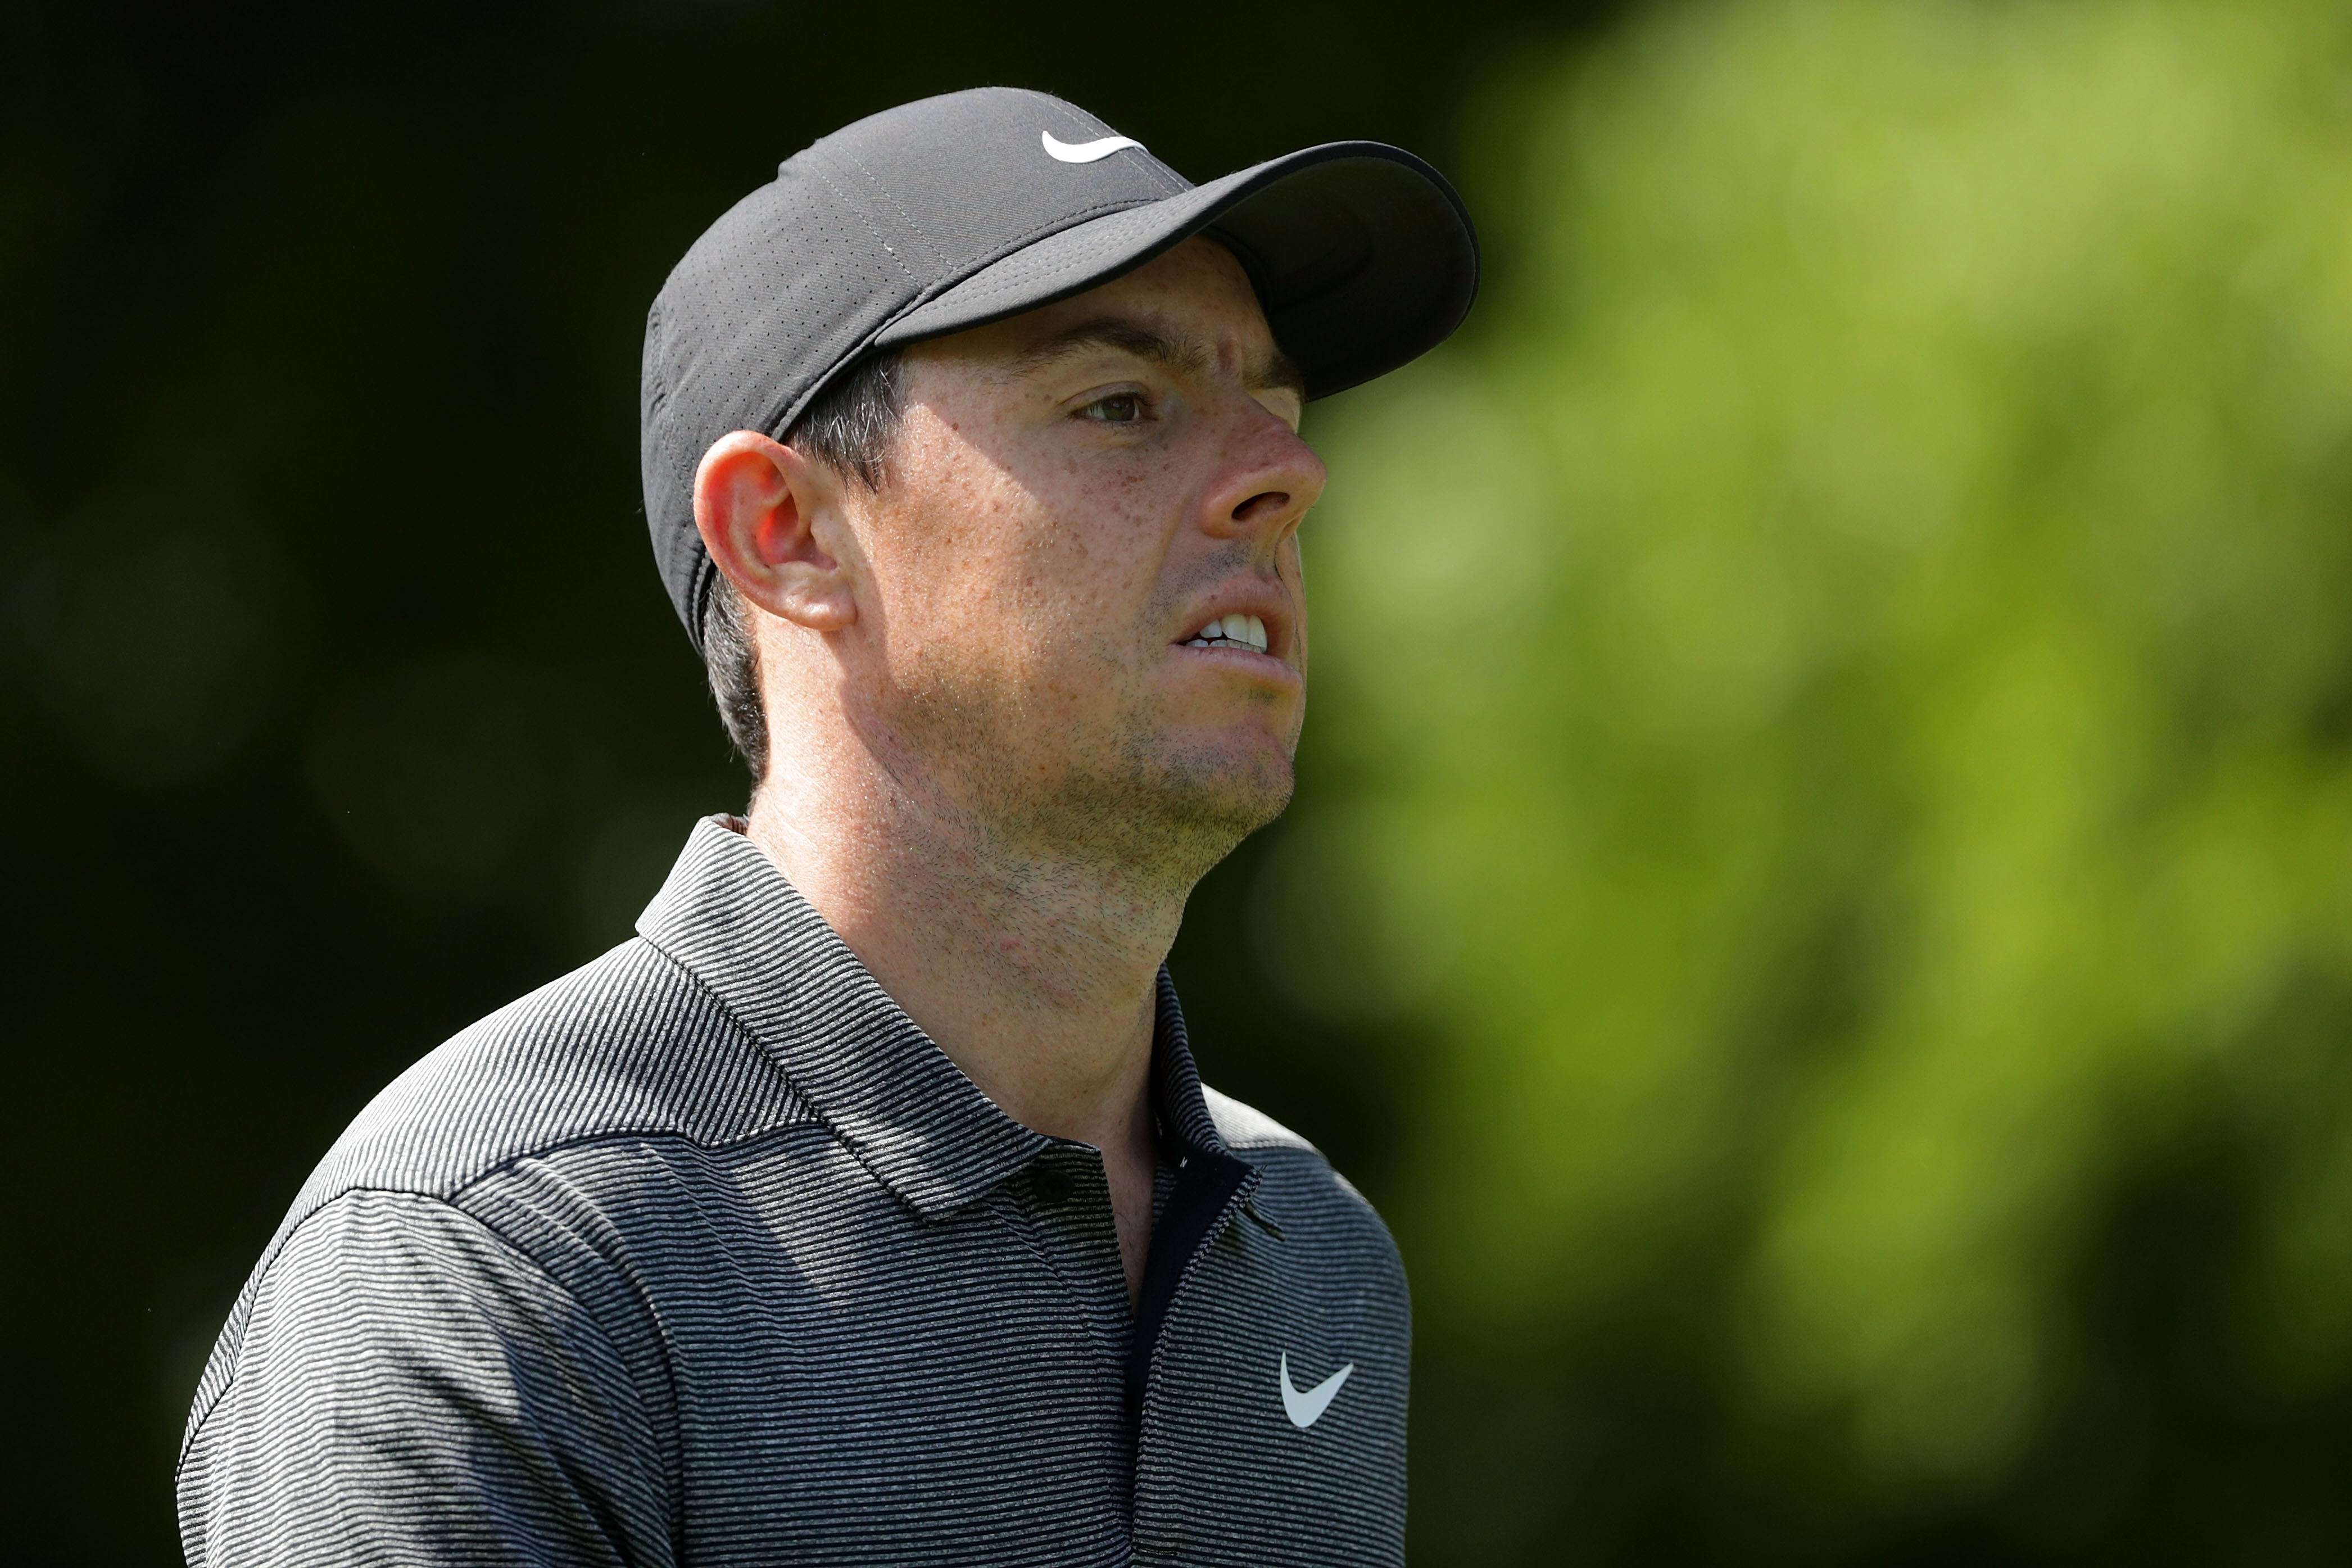 Rory McIlroy off to solid start at Wells Fargo Championship